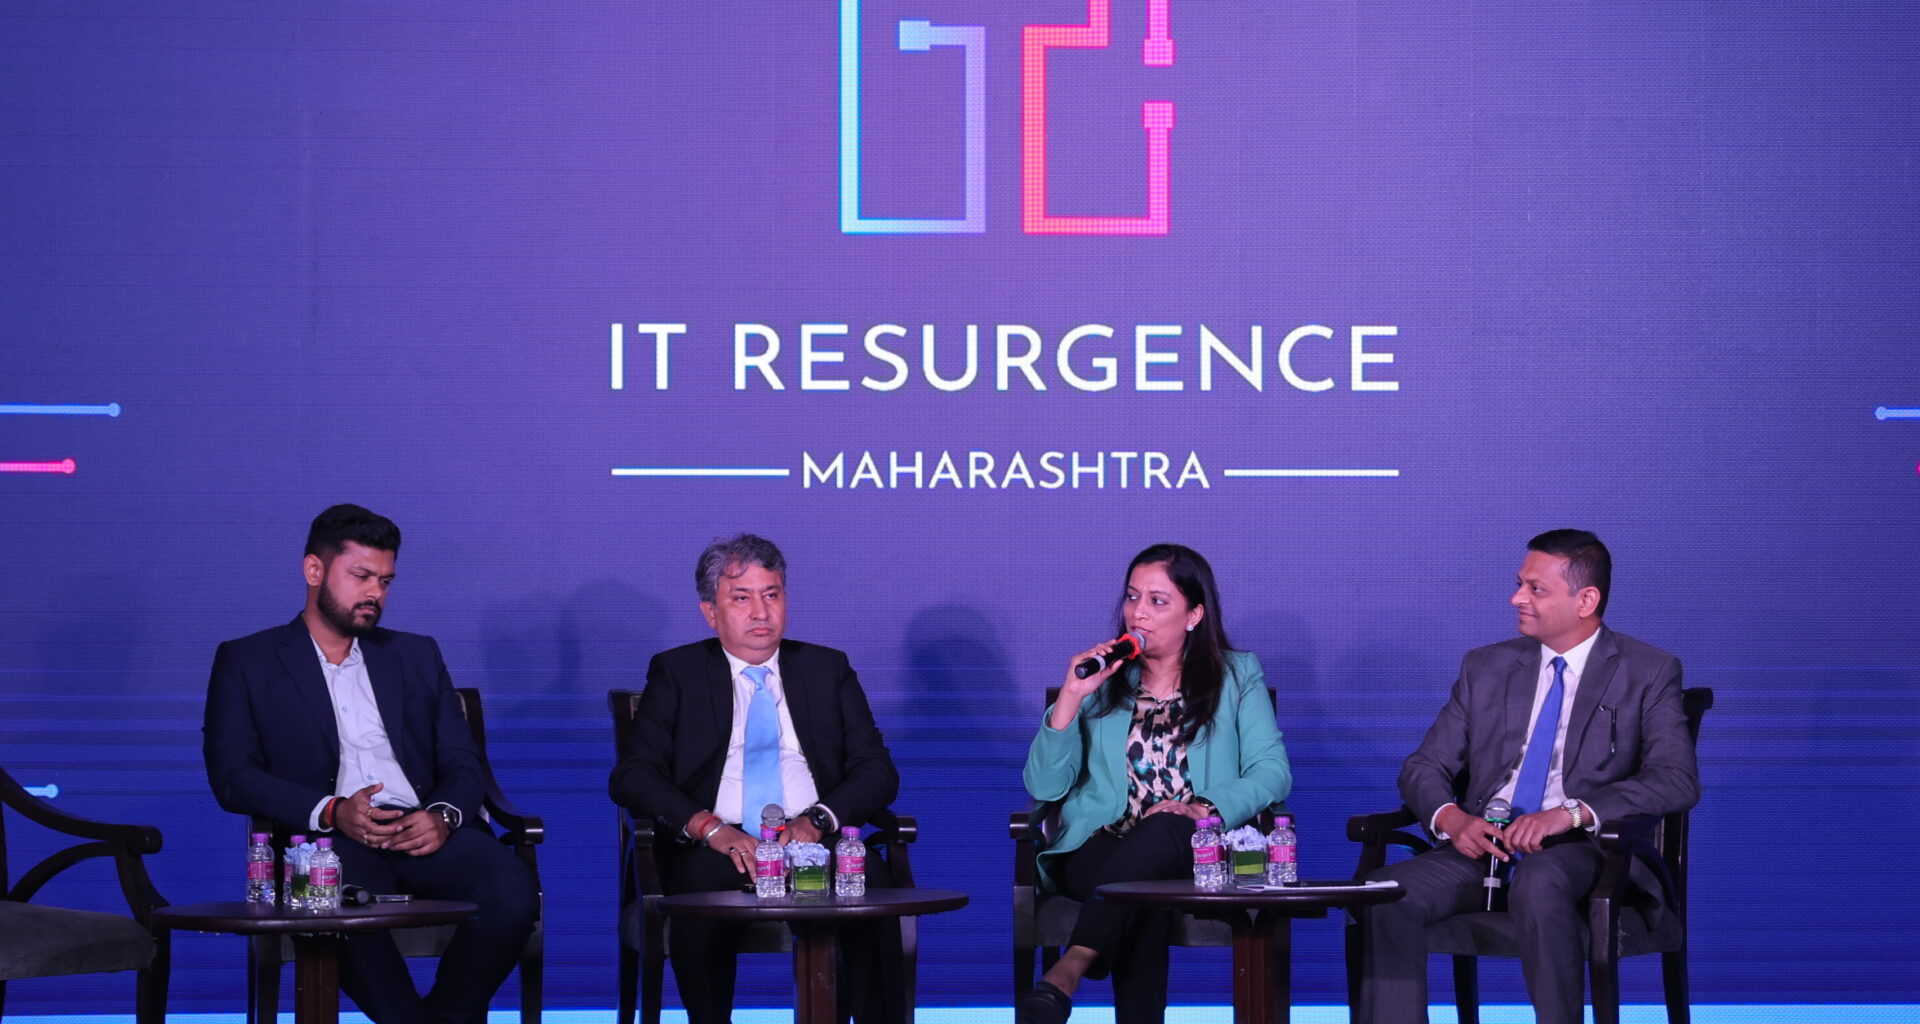 TATA Realty’s IT Resurgence Event explores Impact of the new IT policy on Maharashtra's Real Estate